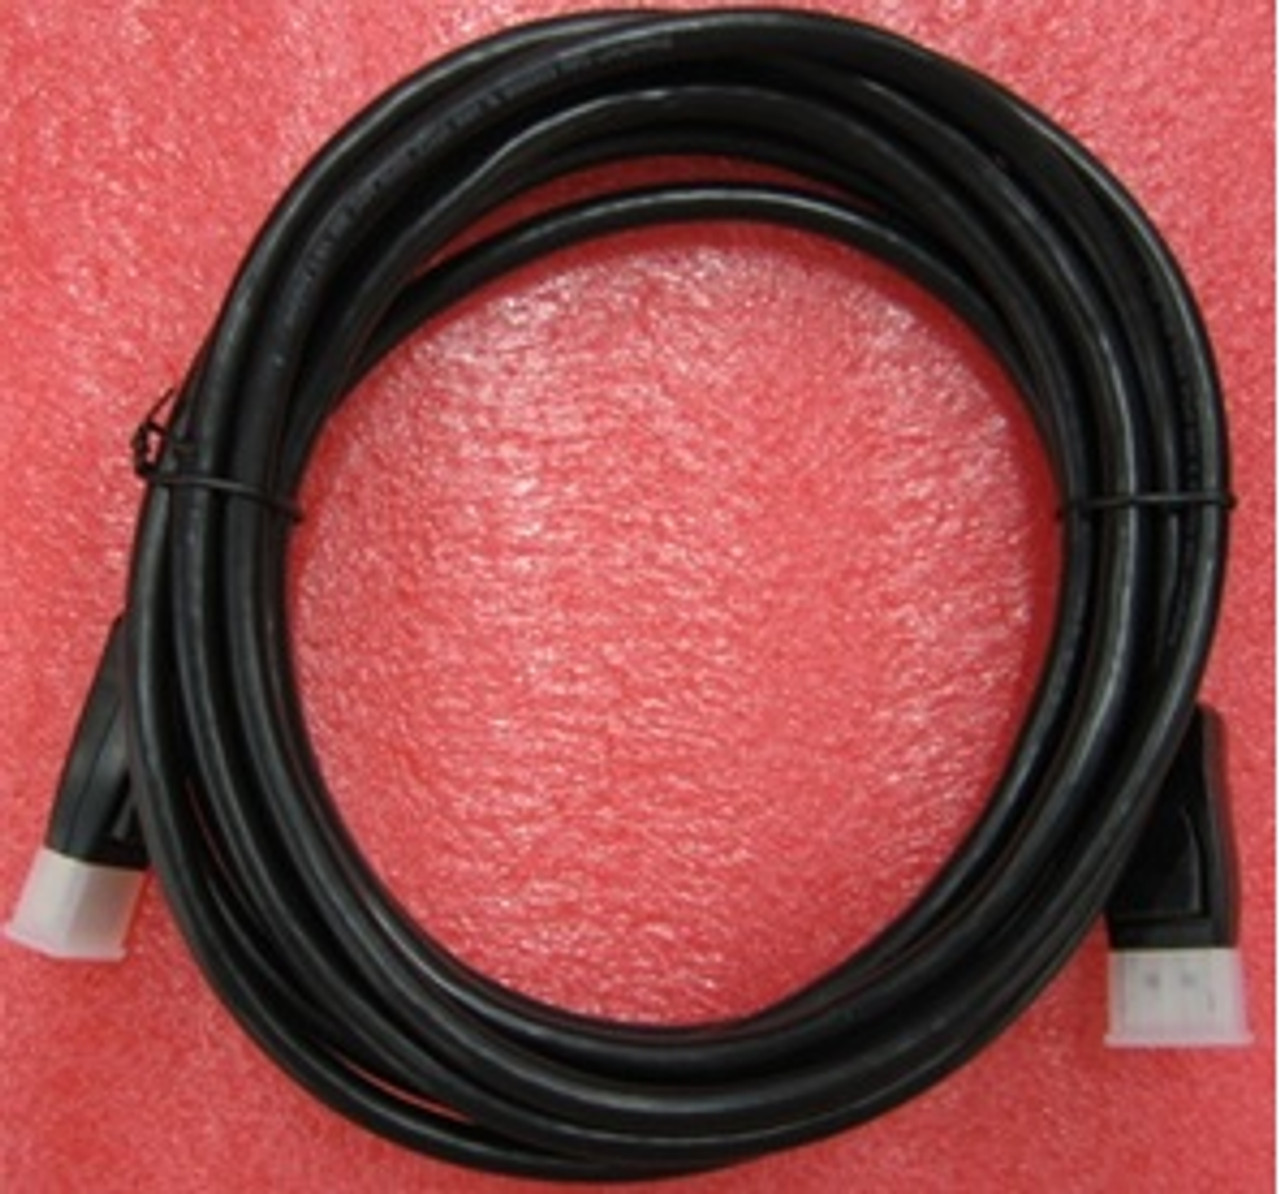 SPS-DISPLAY PORT Cables W/ LATCH - 736395-001